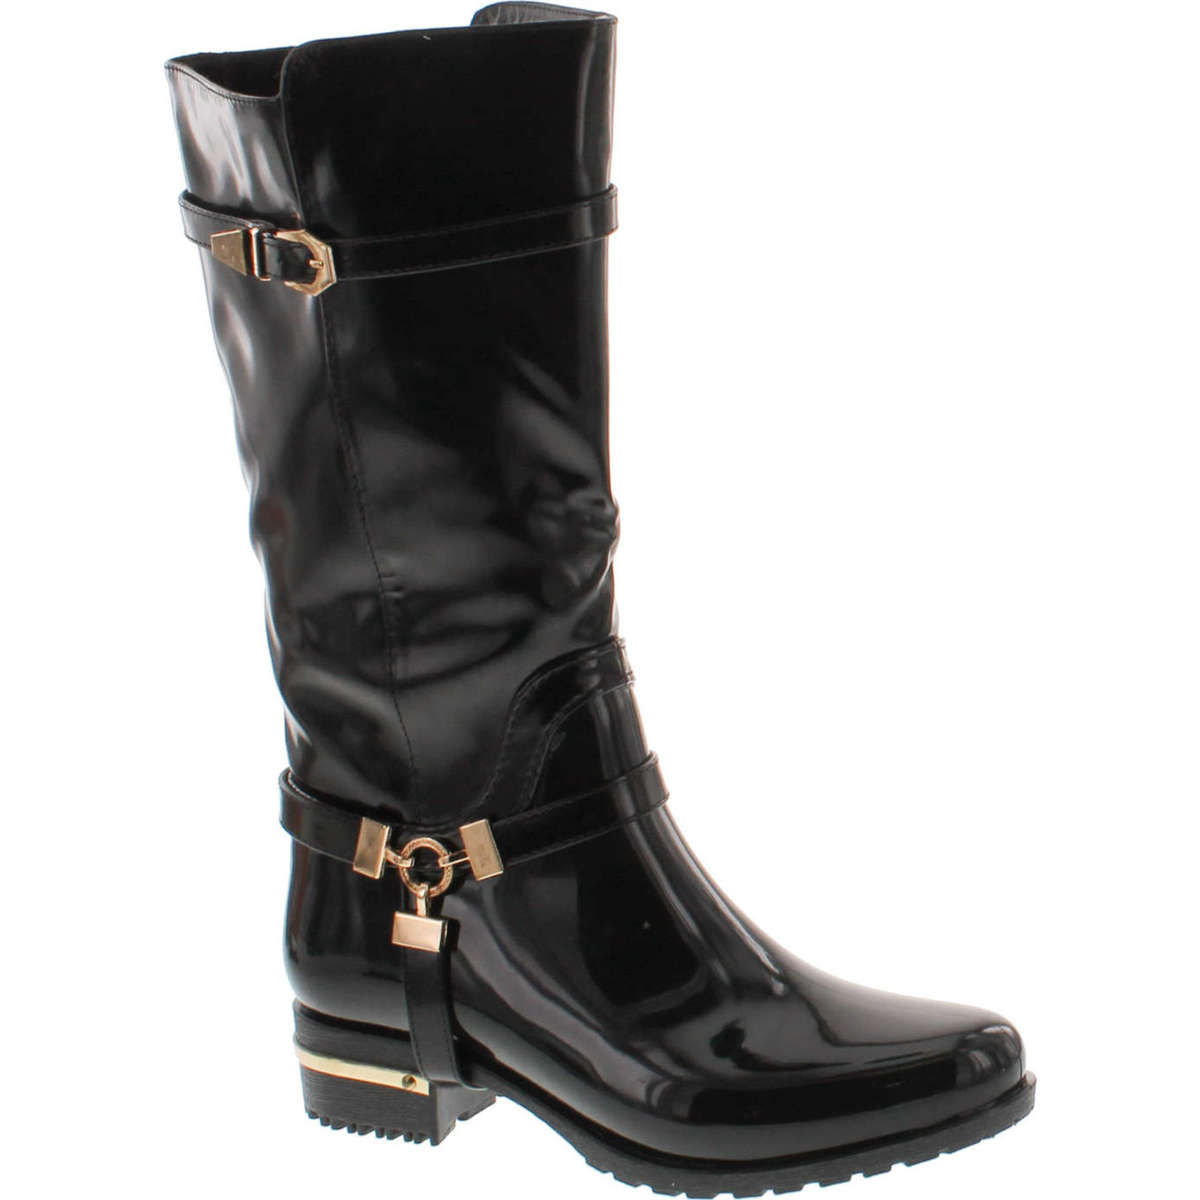 Forever Clara-25 Womens Fashion Two Tone Knee High Motorcycle Rain Boots